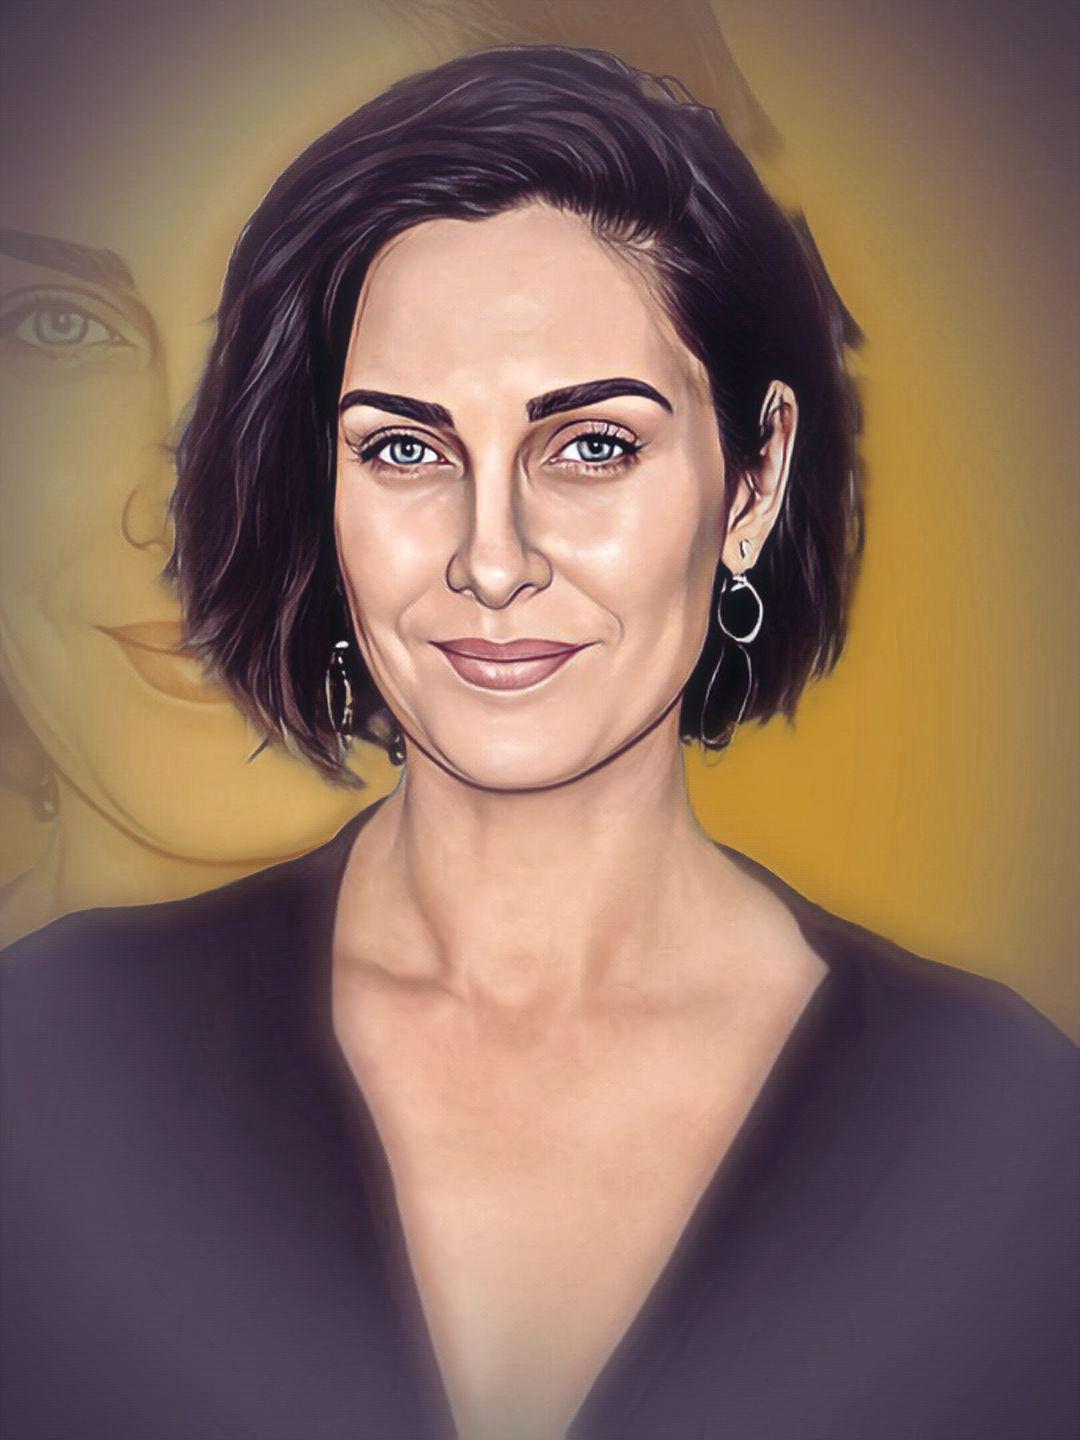 Www Dice Hot Sieal Pack Xxxx Videos Belonging - Carrie-Anne Moss - Celeb ART - Beautiful Artworks of Celebrities,  Footballers, Politicians and Famous People in World | OpenSea